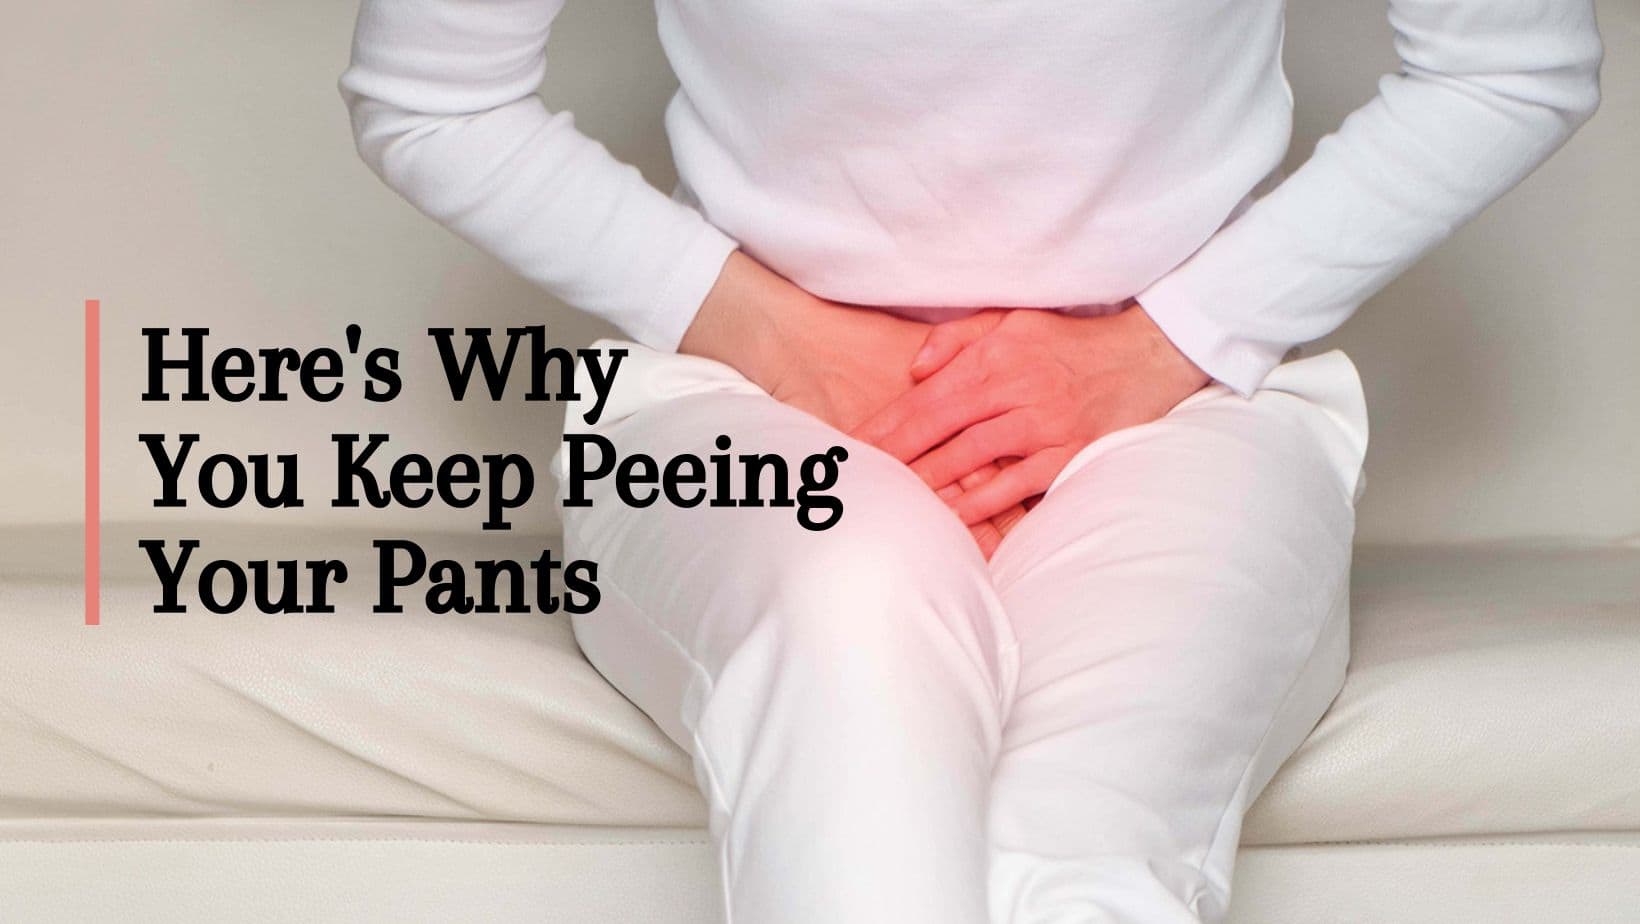 How to Hide That You Peed Your Pants: 14 Steps (with Pictures)